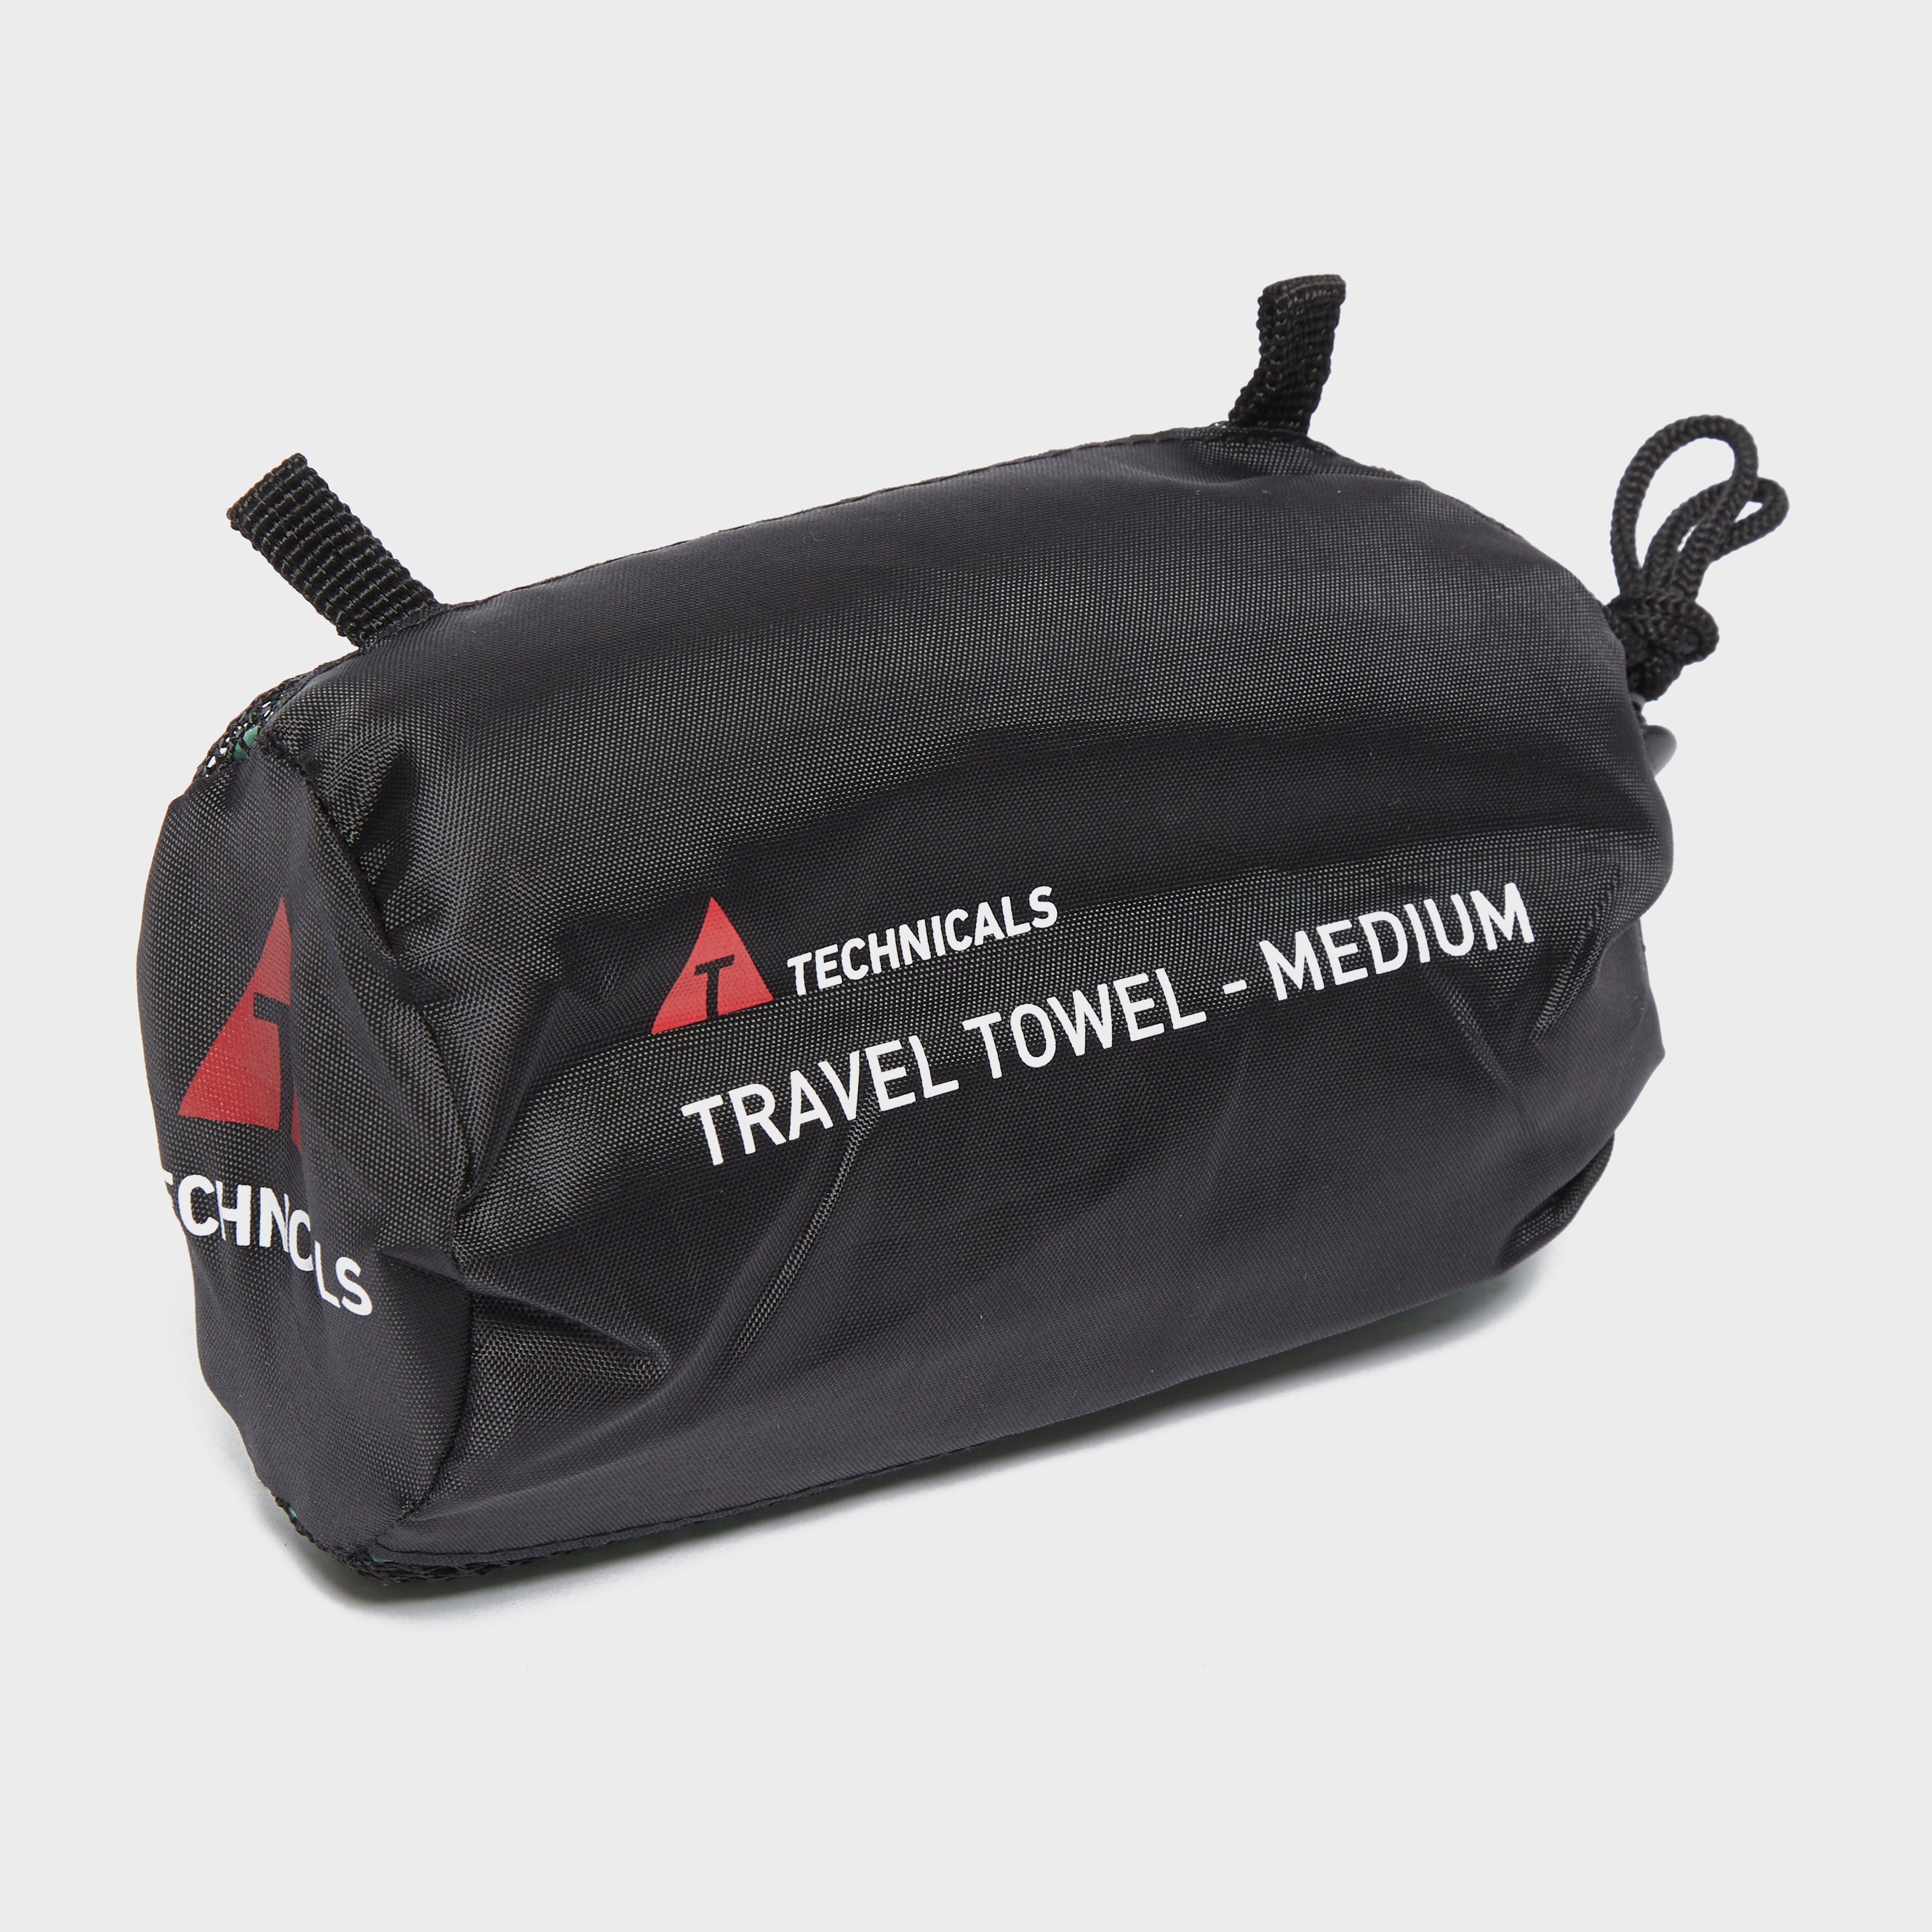 Image of Technicals Suede Microfibre Travel Towel (Medium) - Only At Go - Green/Grn, Green/GRN